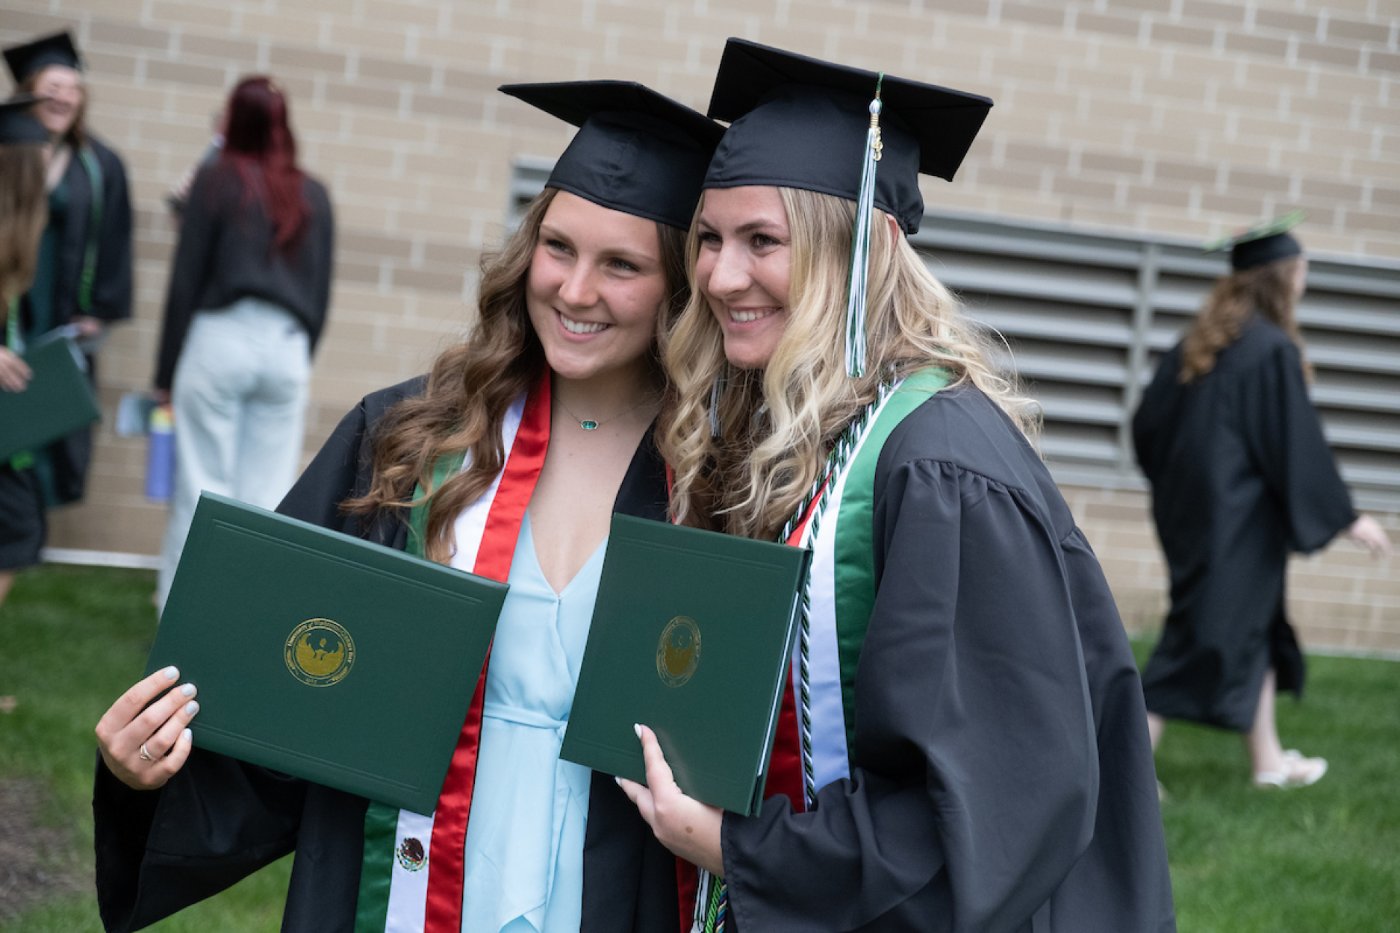 Two female students hold their diplomas and post for a photo outdoors after a Commencement ceremony.